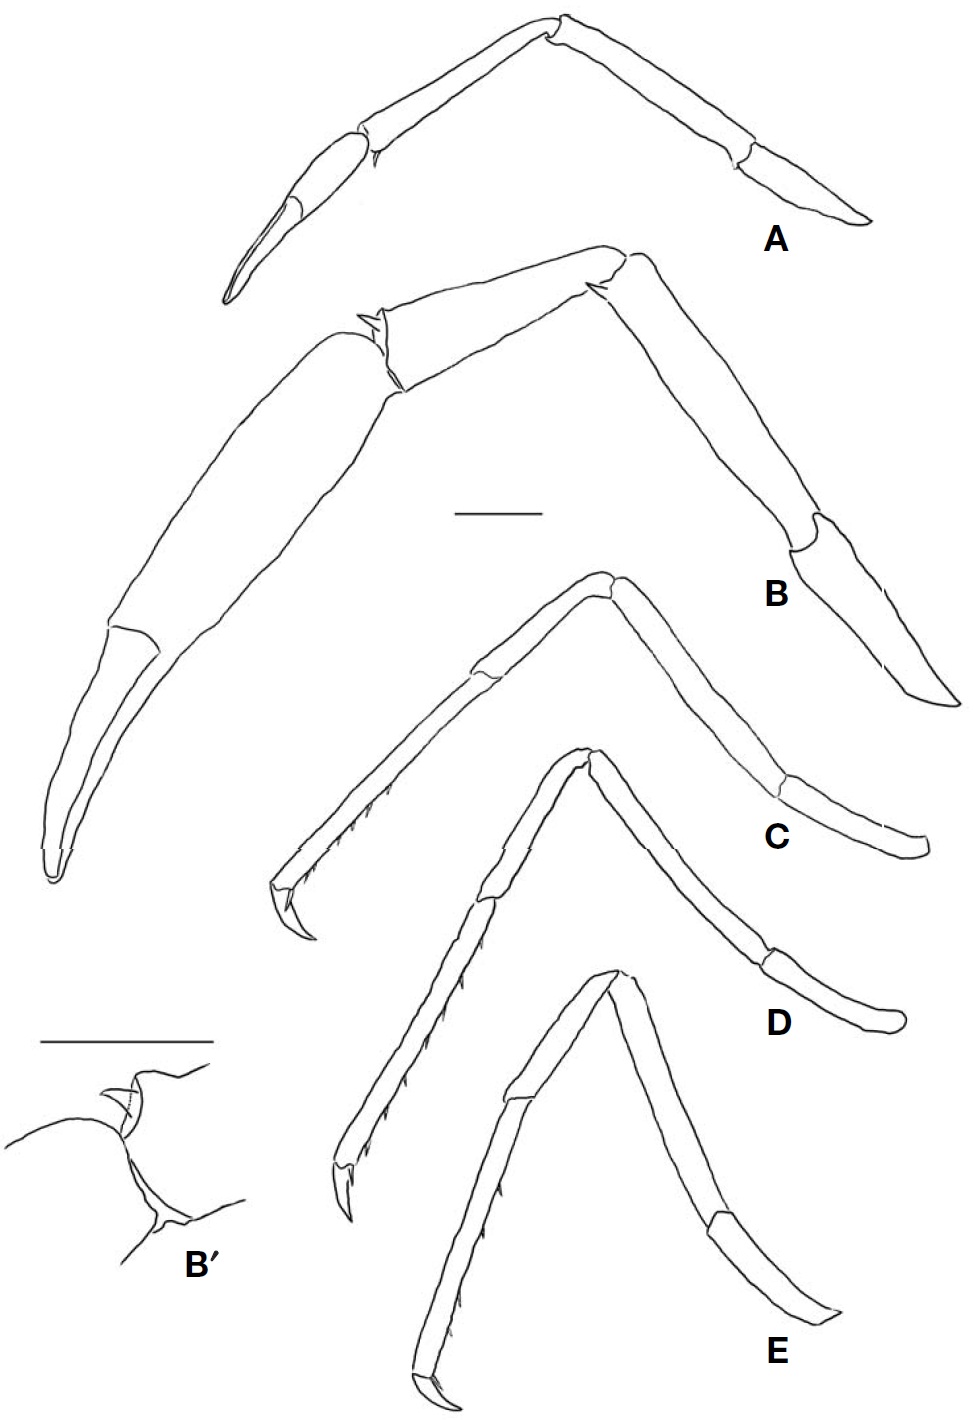 Cuapetes grandis ovigerous female (postorbital carapace length 5.1 mm eggs omitted). A Left 1st pereopod lateral; B Left 2nd pereopod lateral; B′ 2nd pereopod′s distal spine of carpus; C Left 3rd pereopod lateral; D Left 4th pereopod lateral; E Left 5th pereopod lateral. Scale bars: A-E B′= 1 mm.